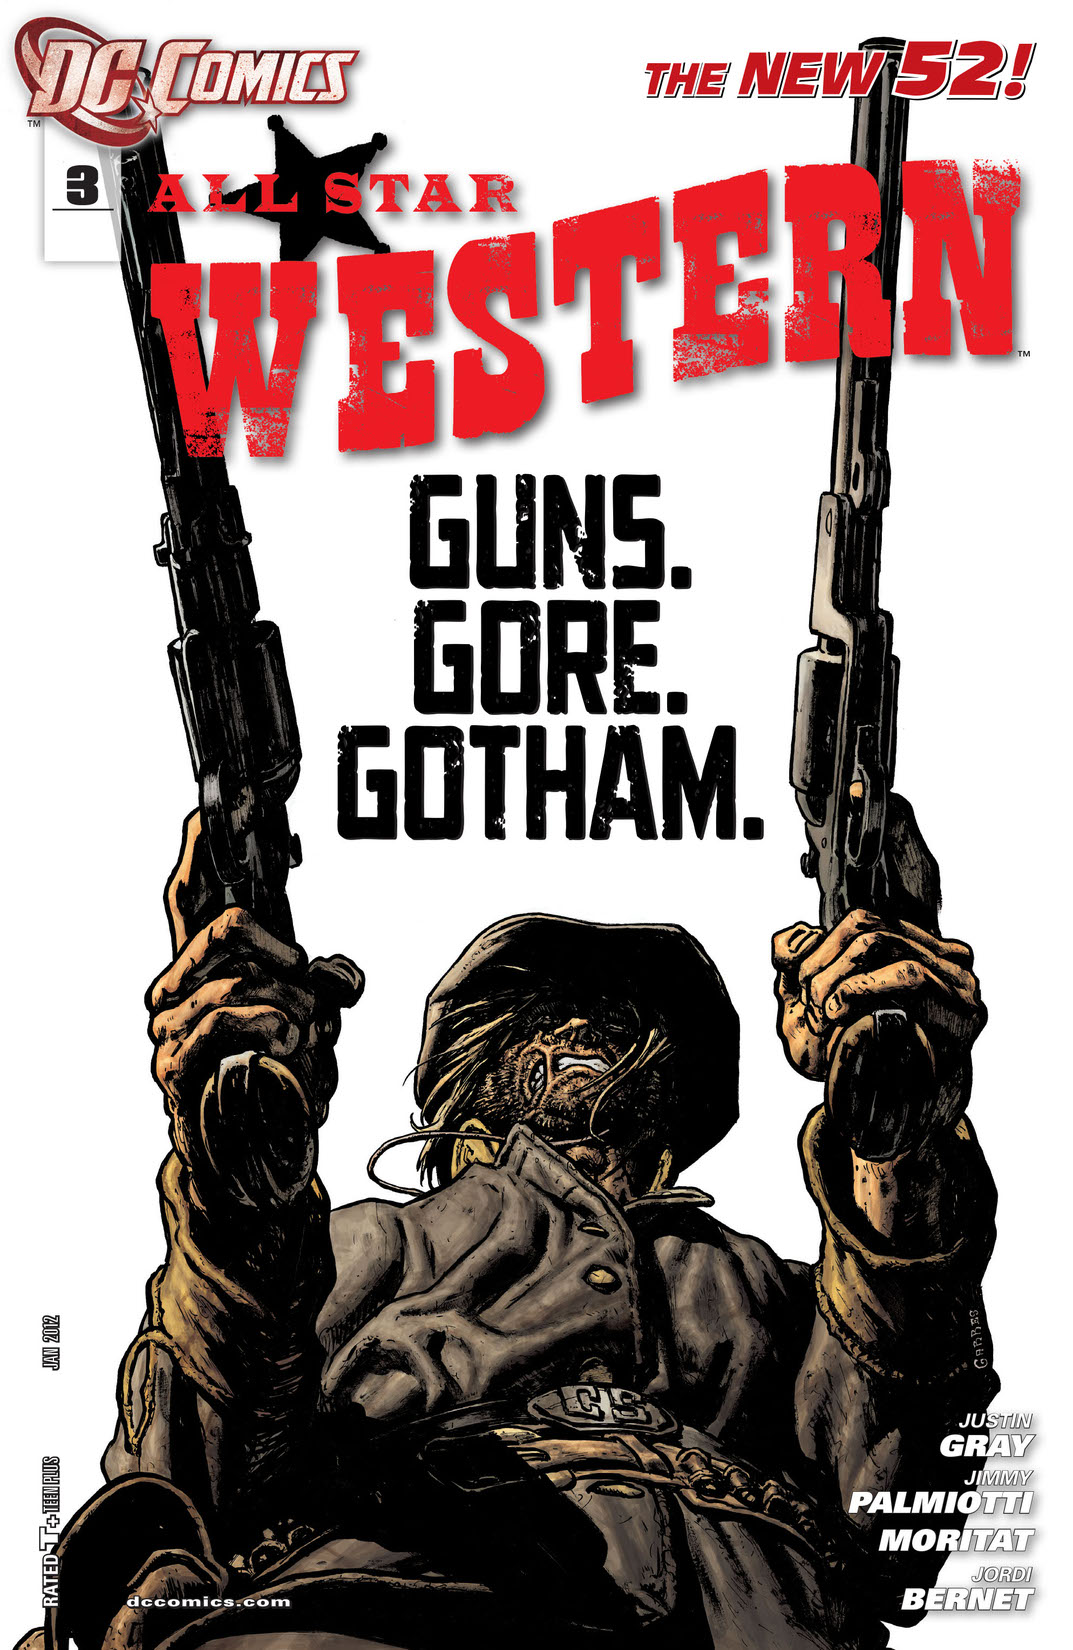 All Star Western #3 preview images